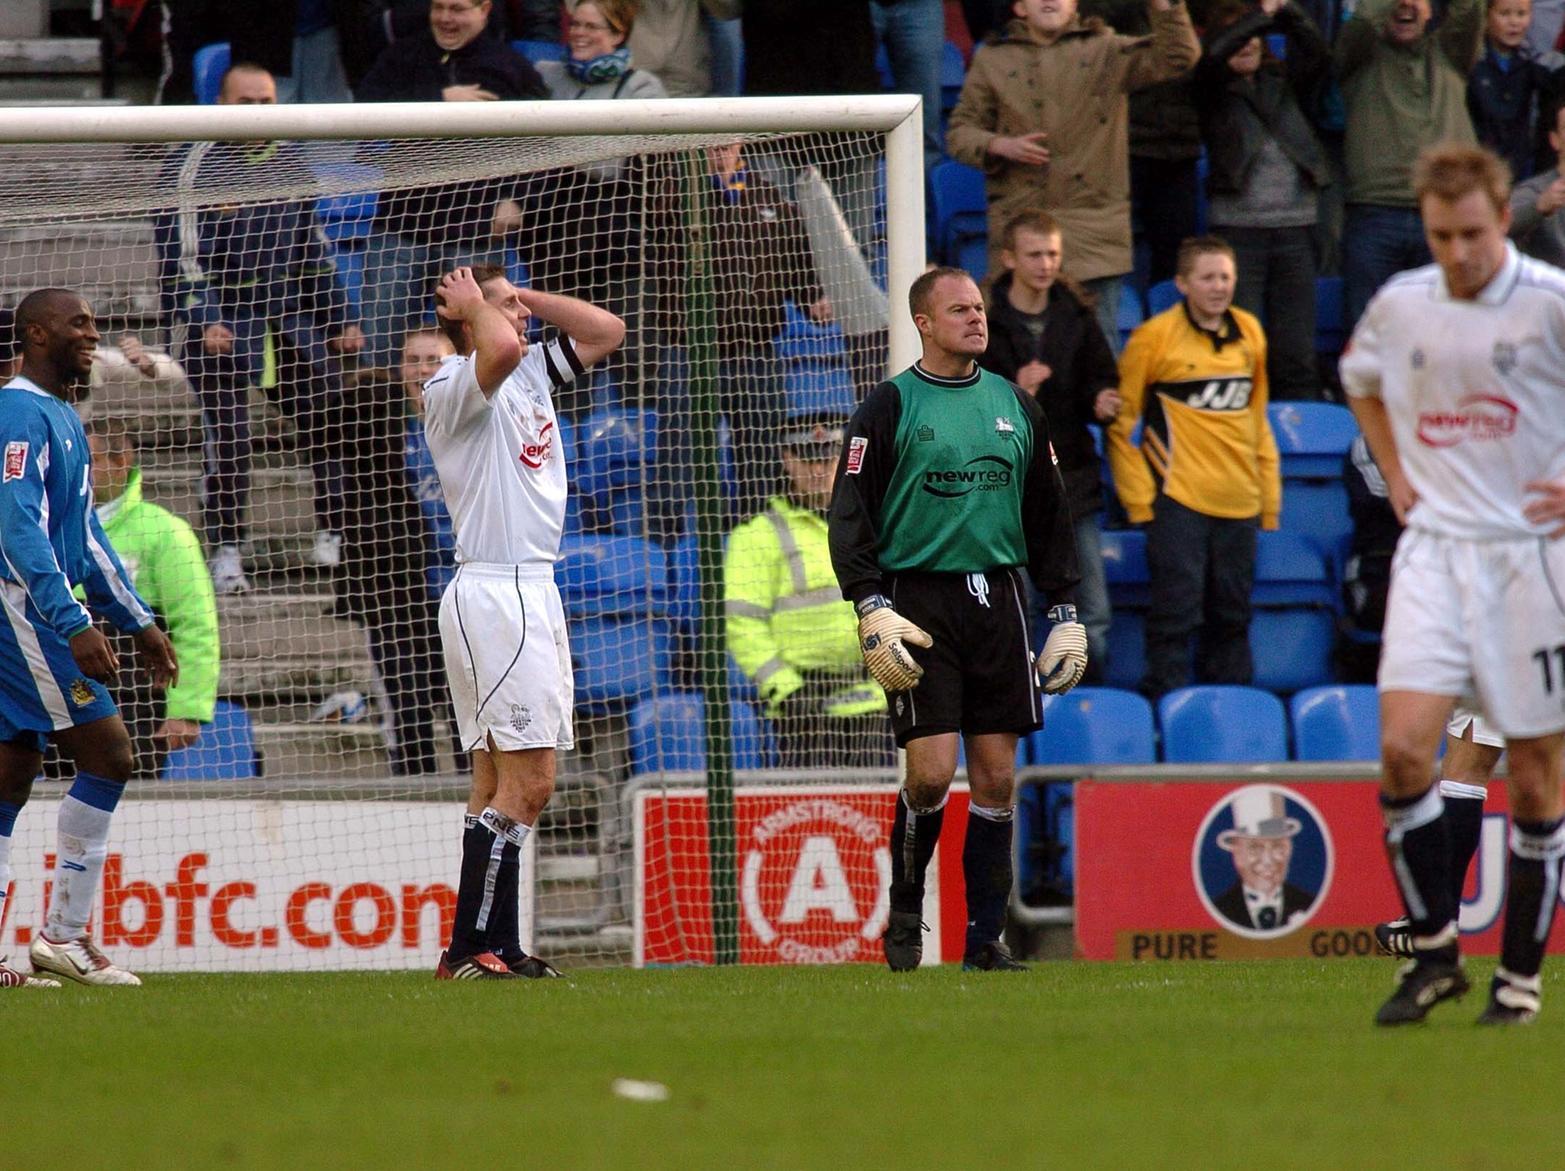 PNE were beaten 5-0 at Wigan in December 2004 and the anguish shows on the face of North End keeper Jonathan Gould